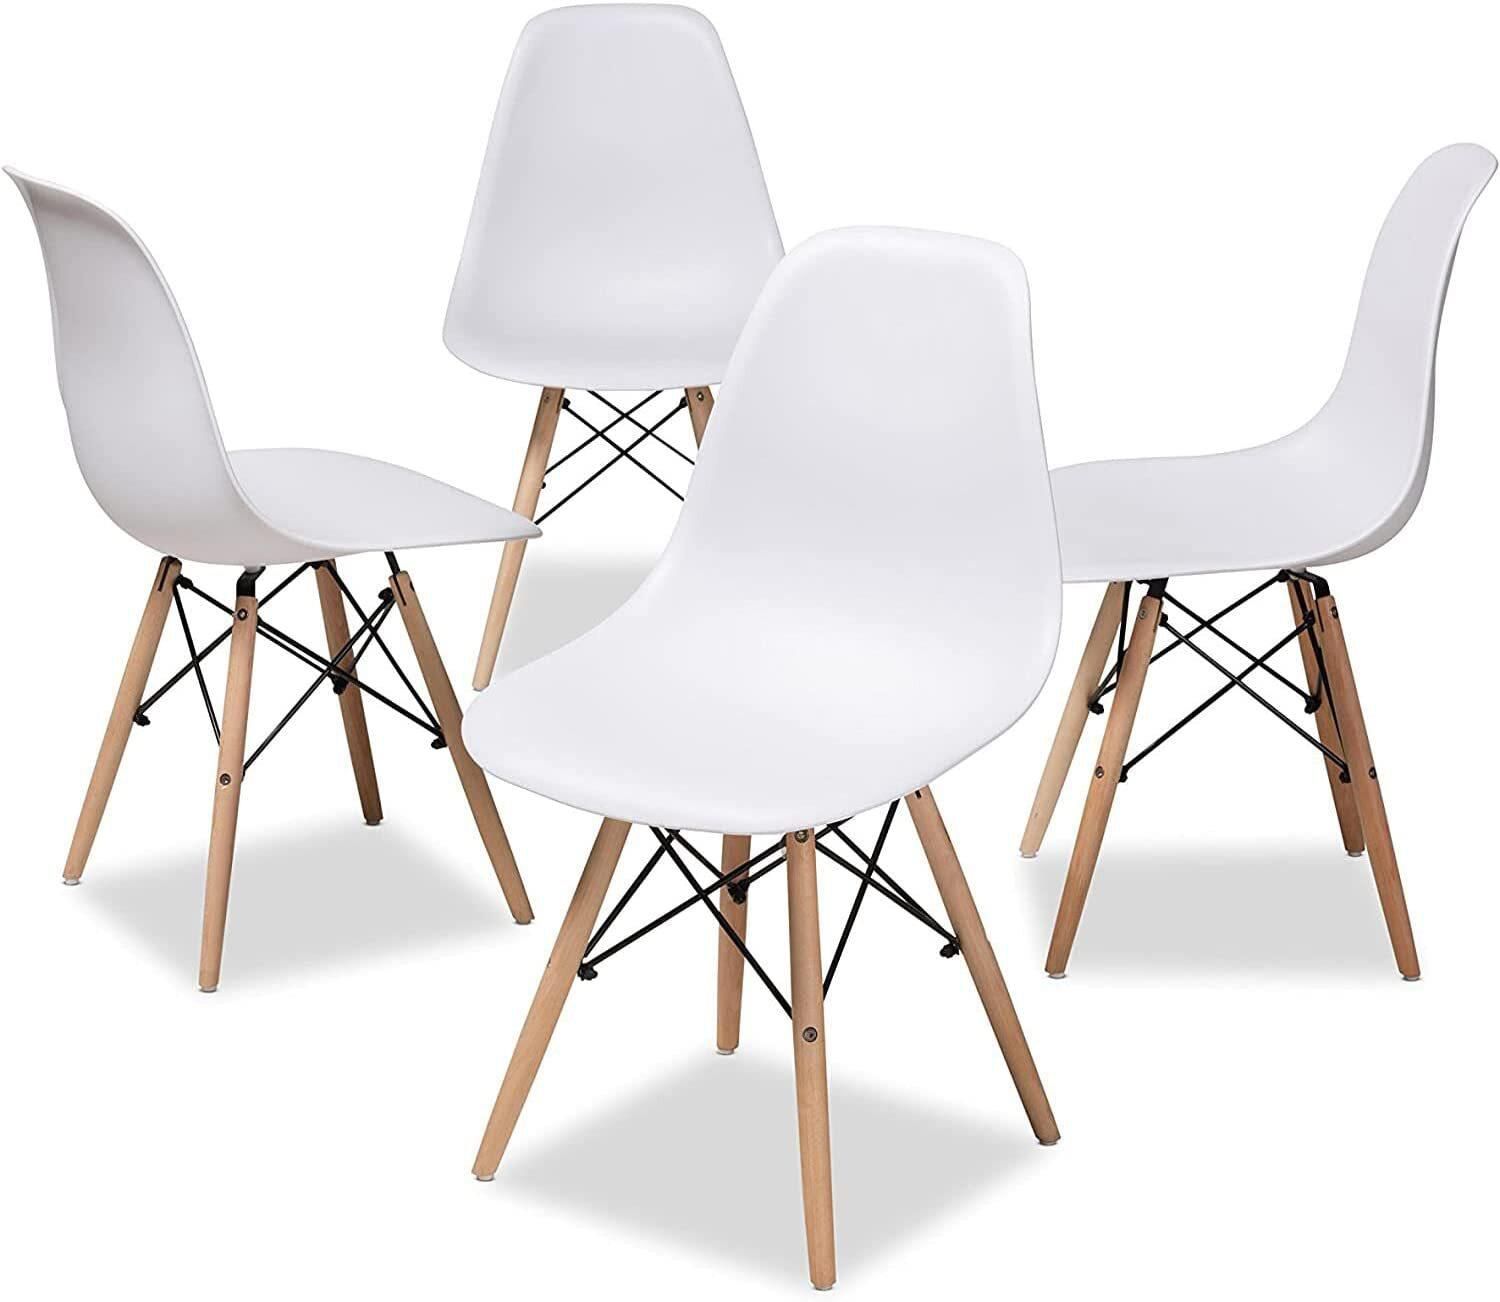 Modern Dining Chair, Lounge Chair, Office Chair, Plastic Shell Chair, Eames Style Chair with Wood Legs and Plastic Seat, for Living Room, Bedroom, Kitchen, Dining Side Chairs, Set of 4 (White)